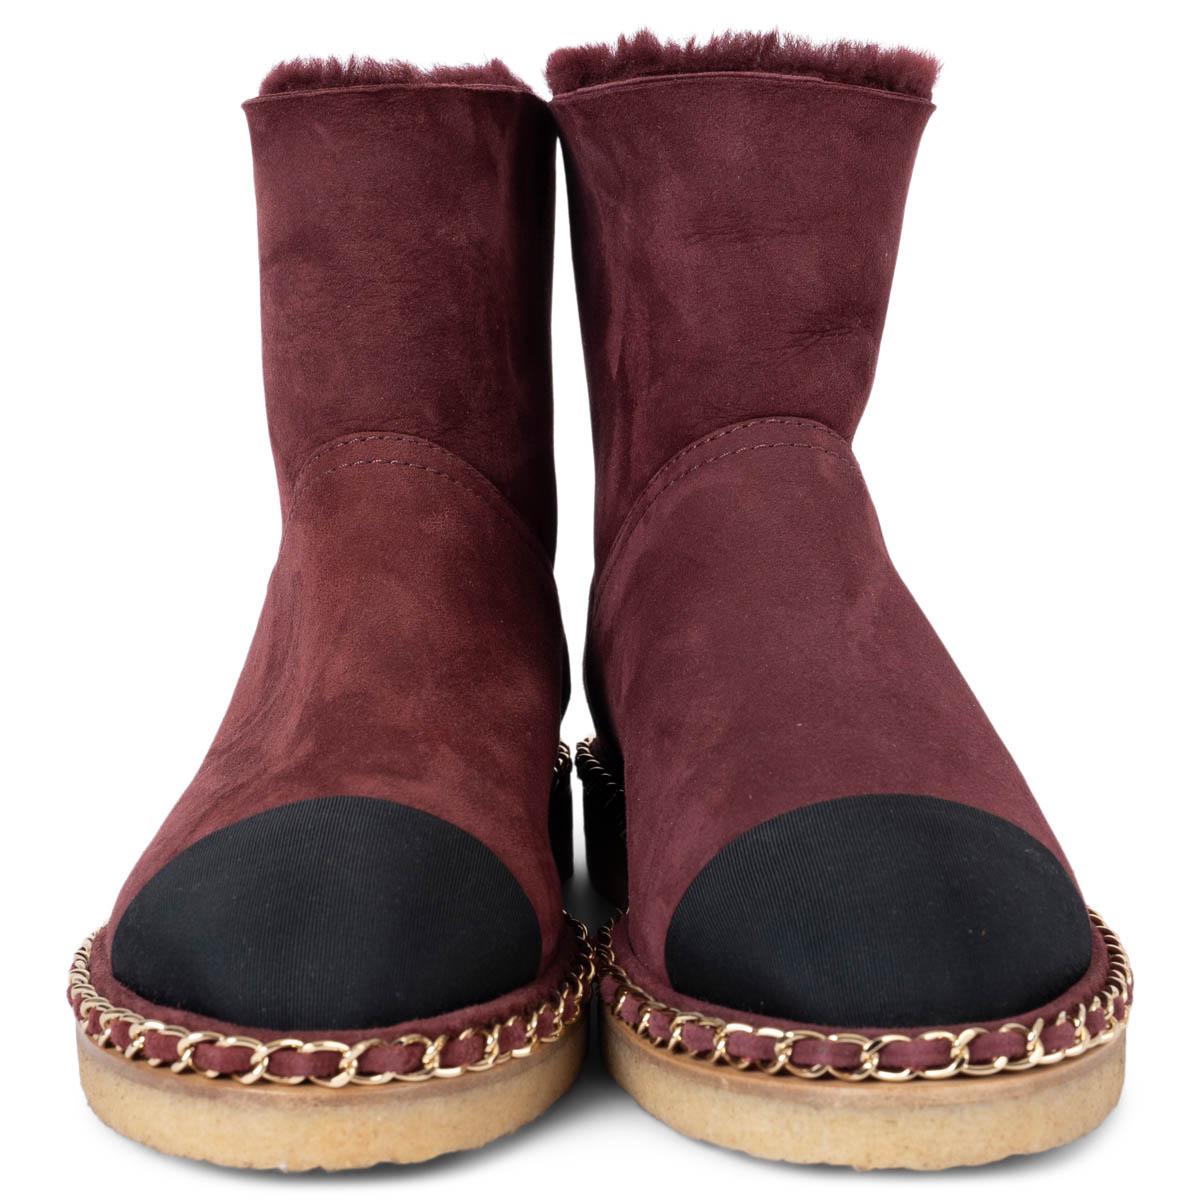 100% authentic Chanel shearling lined boots in burgundy suede featuring classic black grosgrain cap toe, bordered with a gold-tone chain and beige crepe sole. Have been worn once inside and are in virtually new condition. 

2019